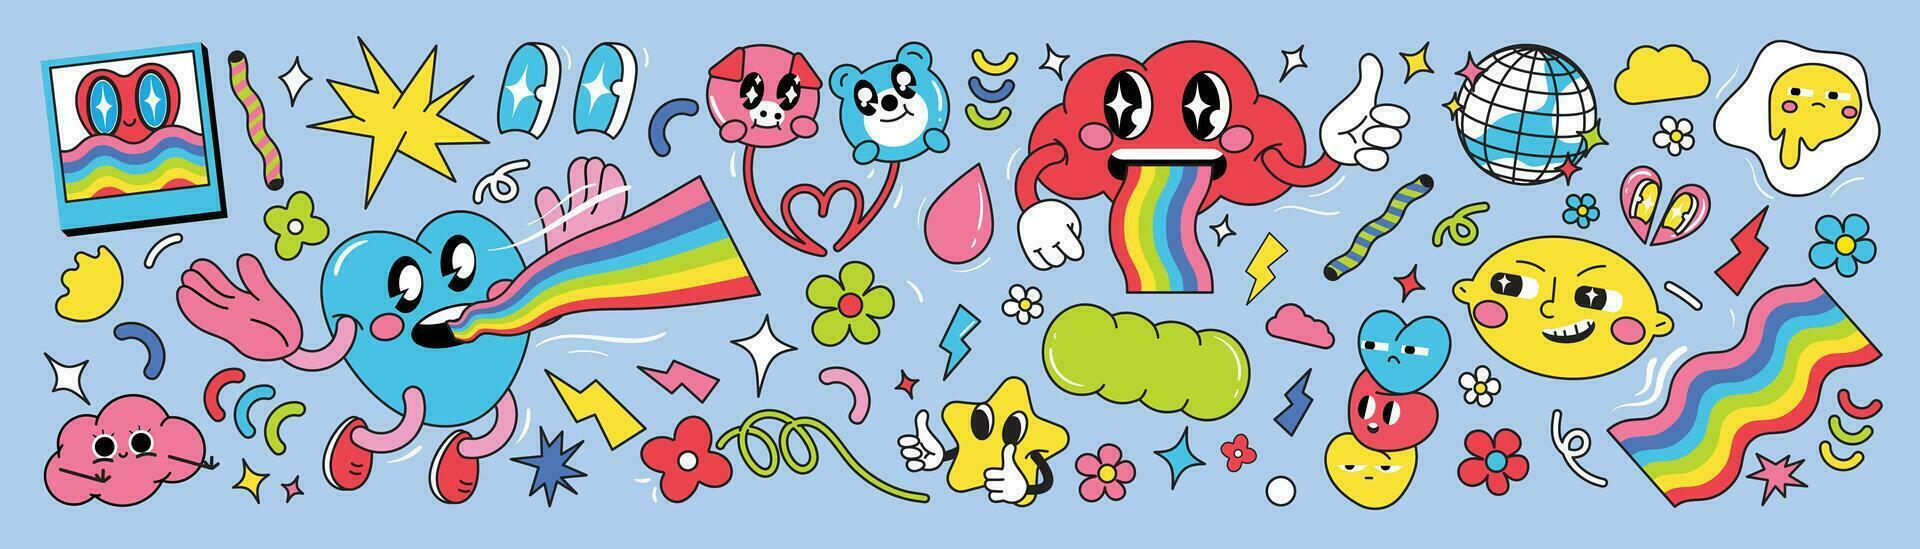 Set of 70s groovy element vector. Collection of cartoon characters, doodle smile face, flower, disco, cloud, heart, sparkle, rainbow, star. Cute retro groovy hippie design for decorative, sticker. vector